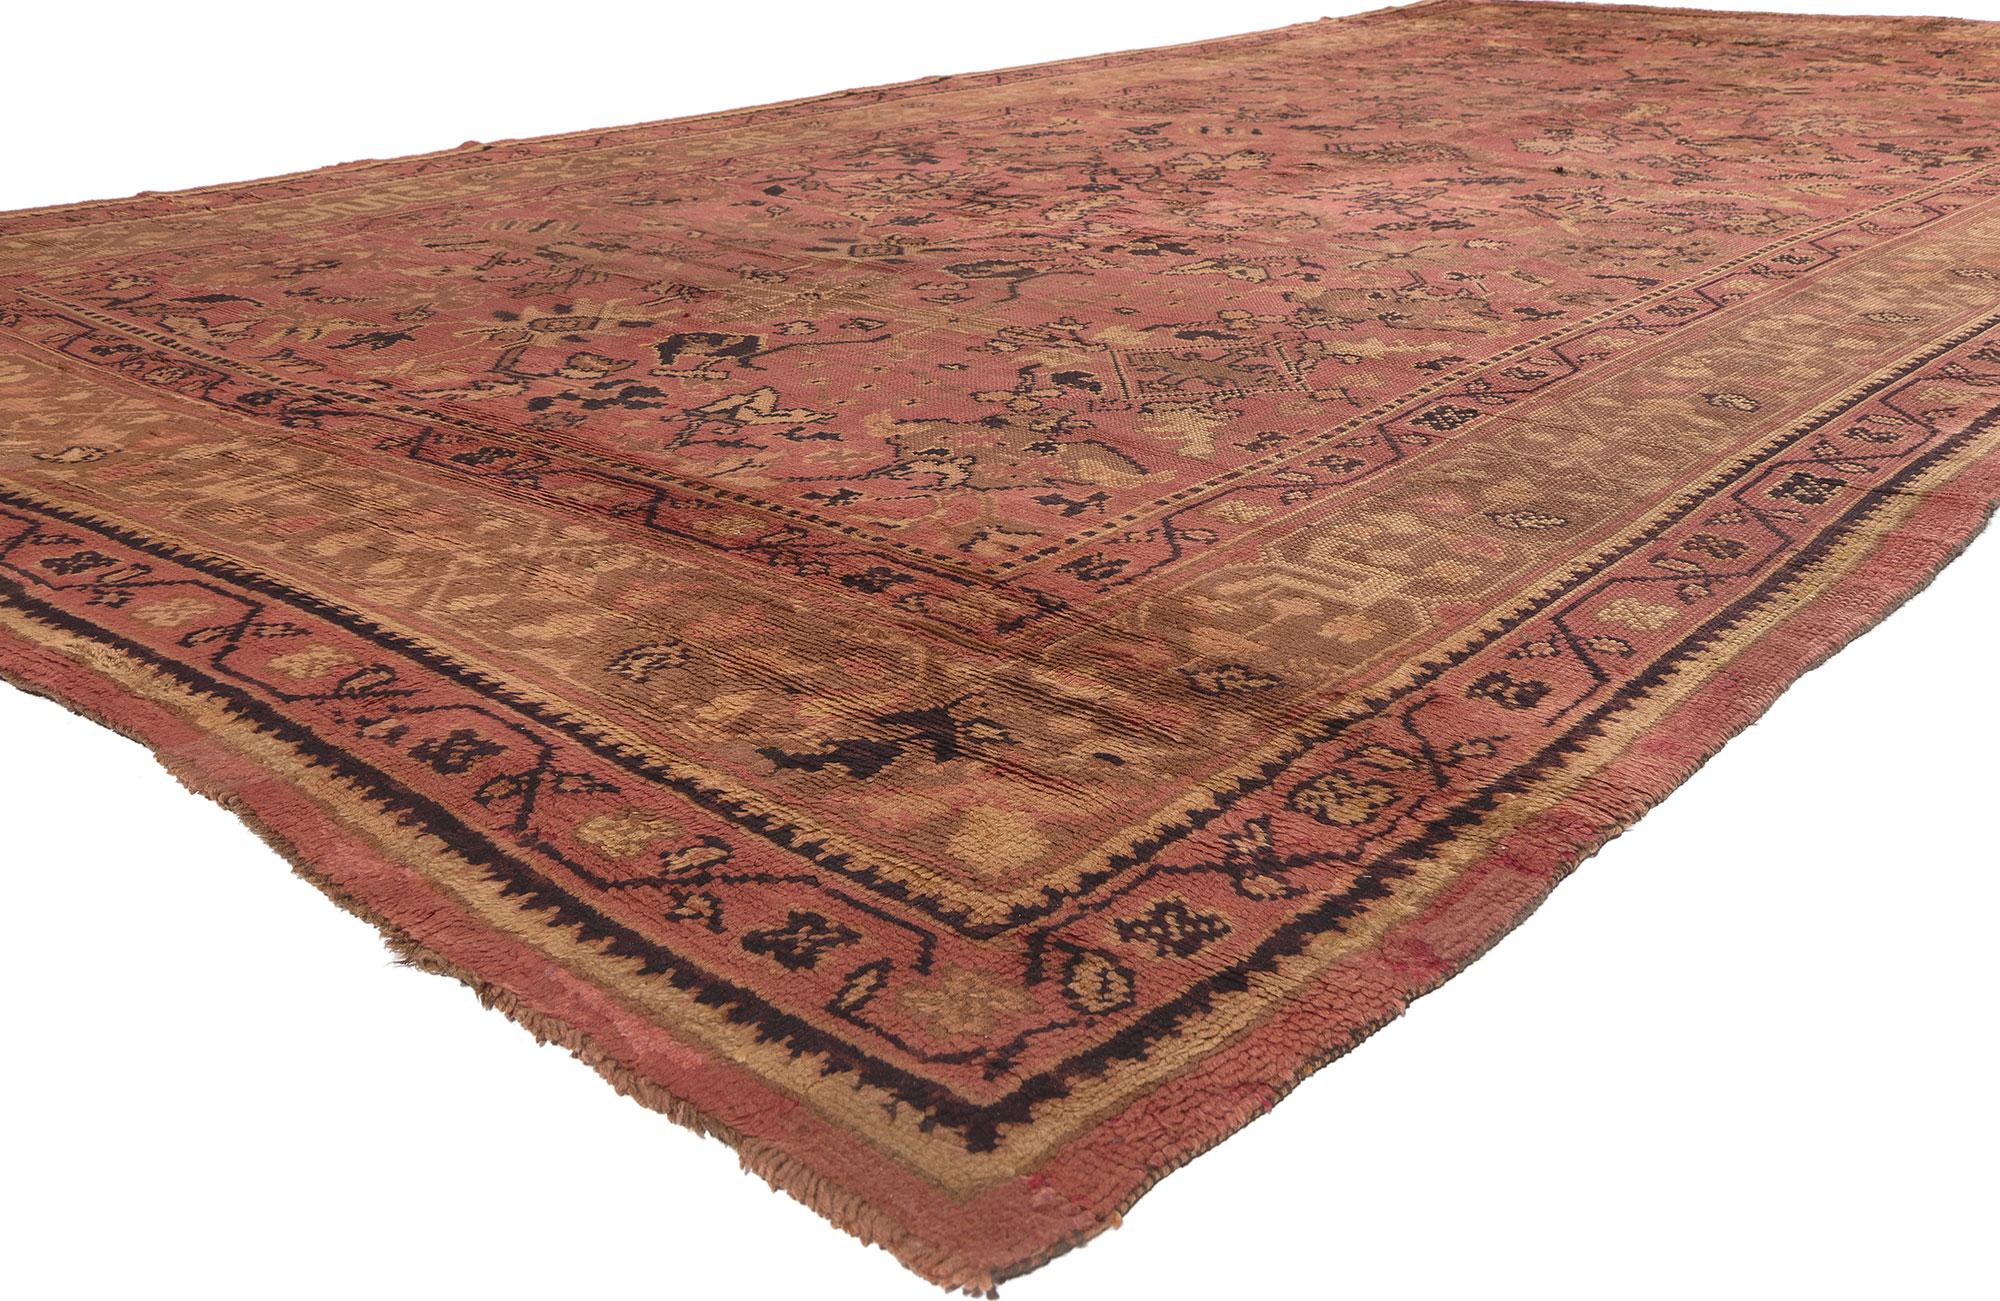 73478 Antique Irish Donegal Rug, 09'10 x 18'07. Evoking the essence of autumn in Ireland, where expansive boglands transition from verdant greens to the resplendent hues of rust and russet, Irish Donegal rugs draw inspiration from the breathtaking